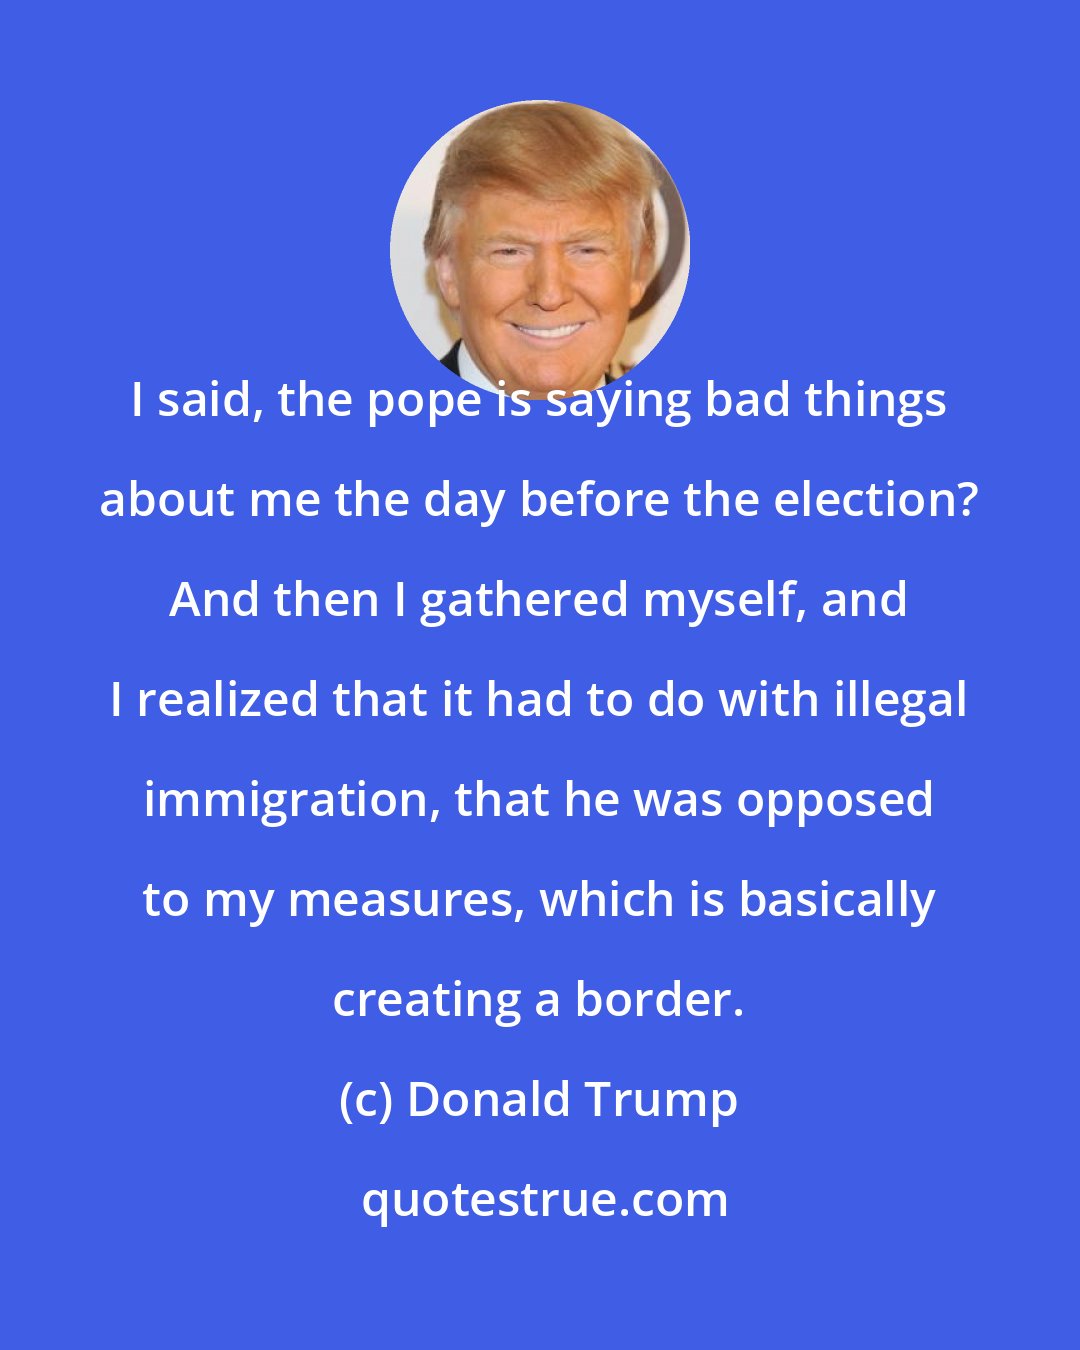 Donald Trump: I said, the pope is saying bad things about me the day before the election? And then I gathered myself, and I realized that it had to do with illegal immigration, that he was opposed to my measures, which is basically creating a border.